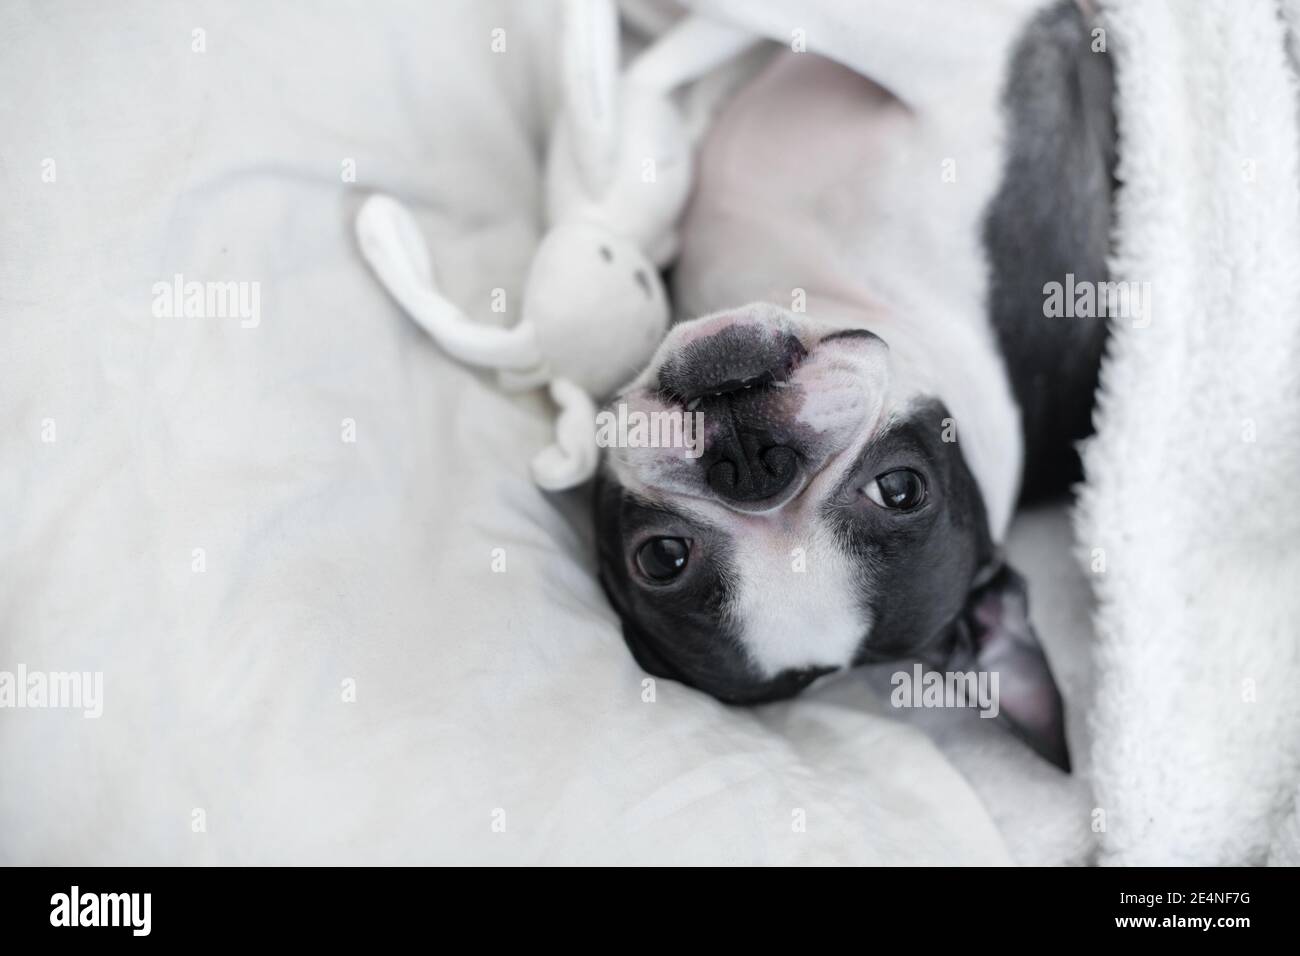 A young funny pet dog, Boston Terrier C, lies in bed under a blanket and watches with his favorite toy - a white soft bunny. Stock Photo